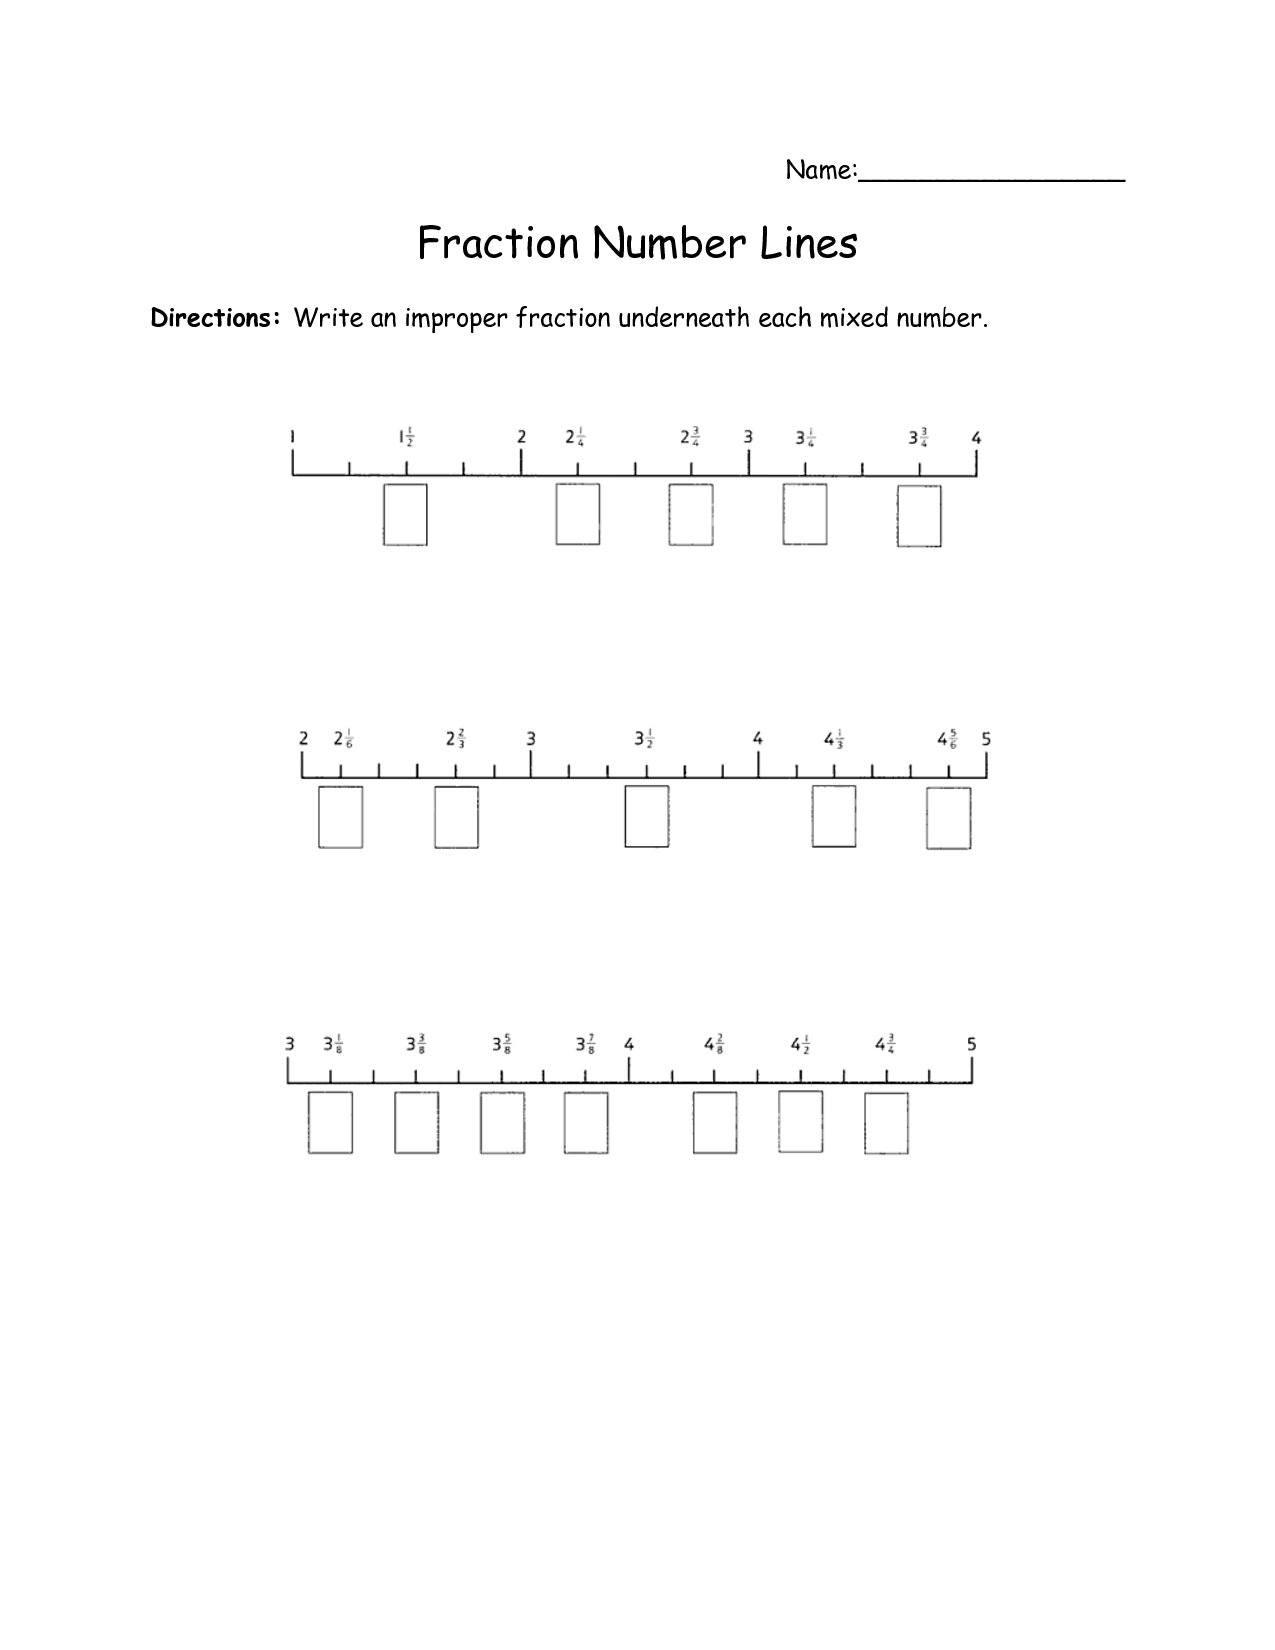 fractions-number-line-worksheet-printable-word-searches